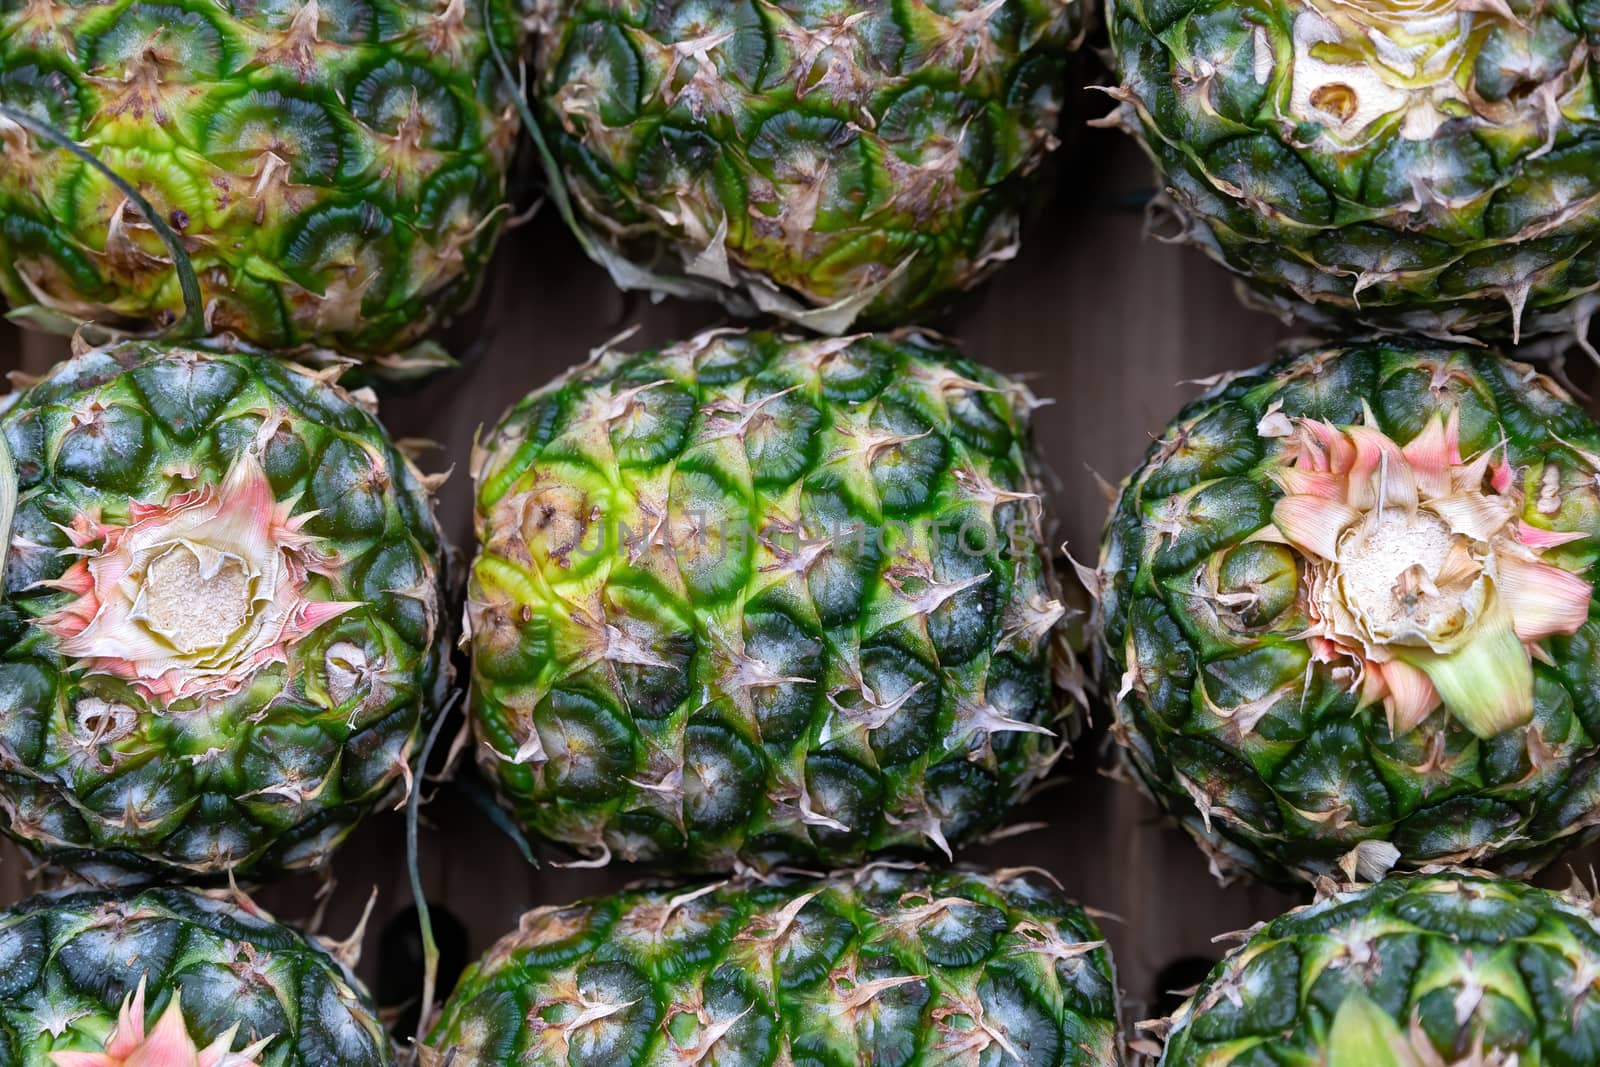 Pineapple, fruit in trays that are being sold in shops and supermarkets in the city